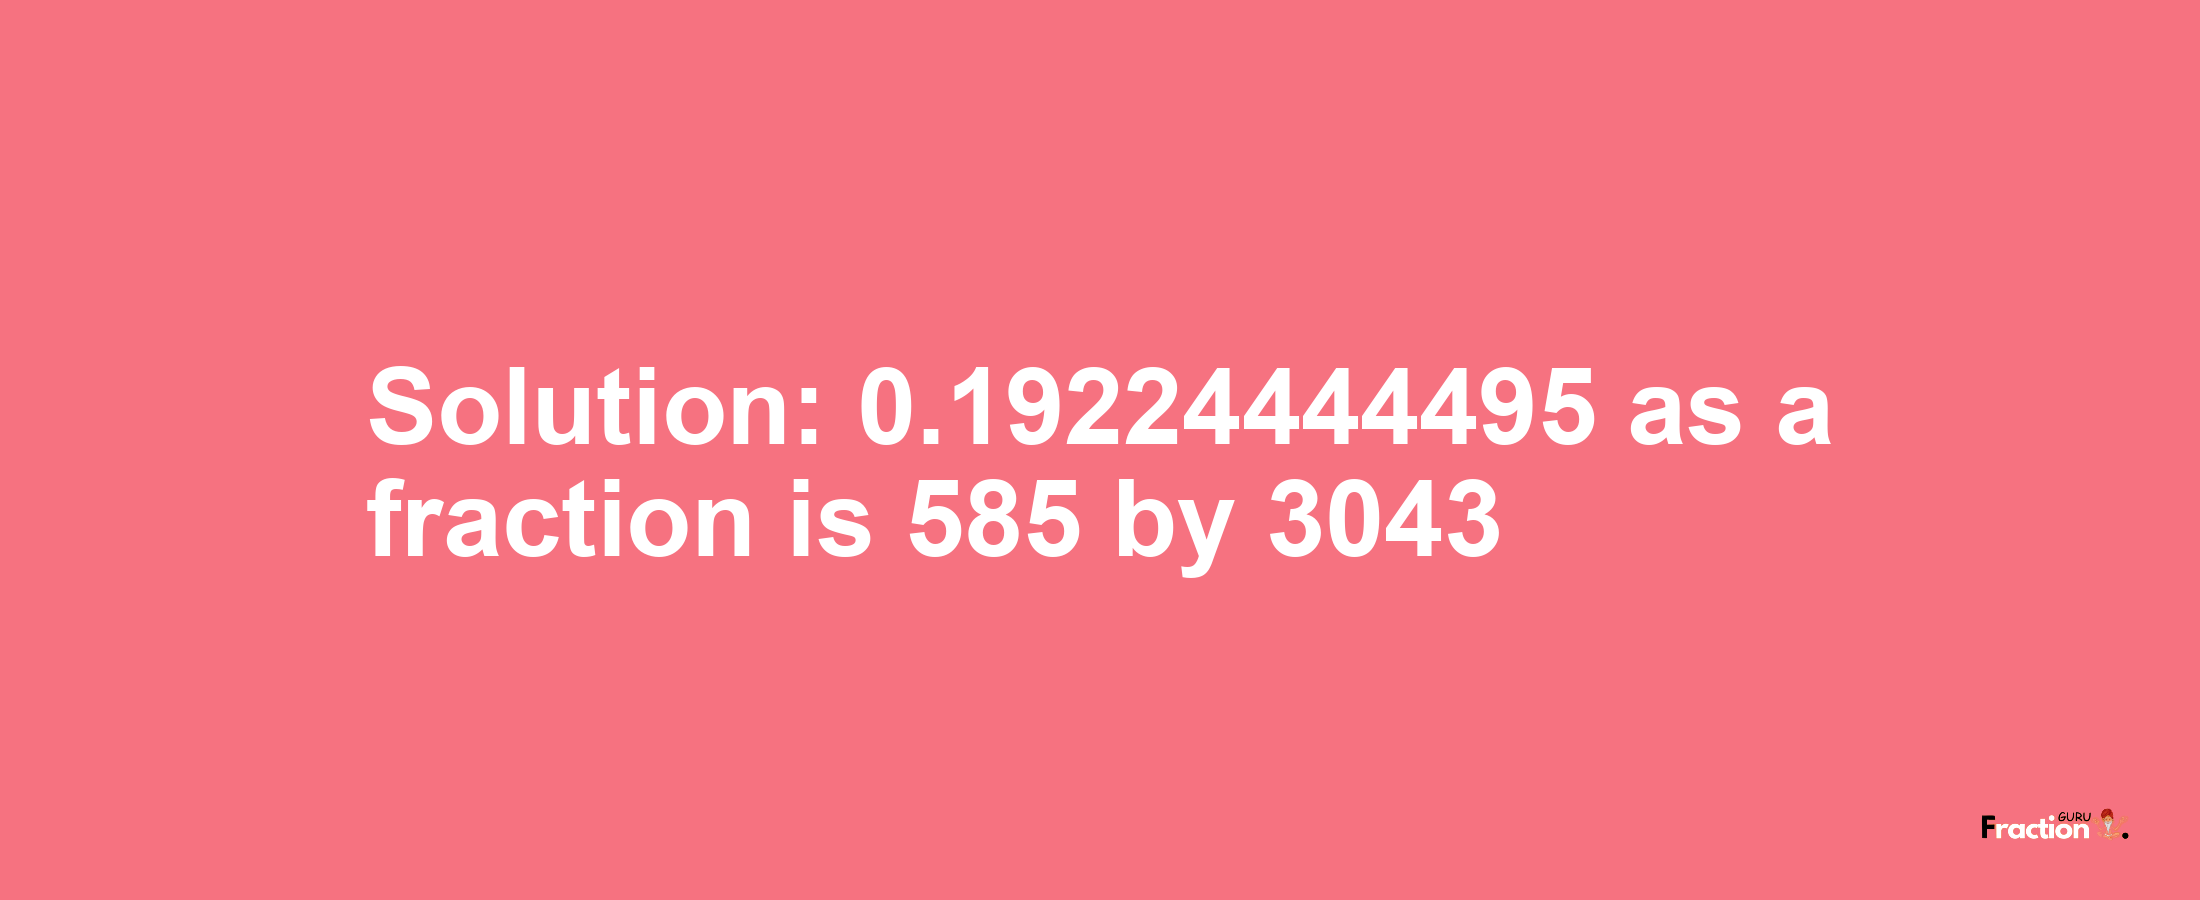 Solution:0.19224444495 as a fraction is 585/3043